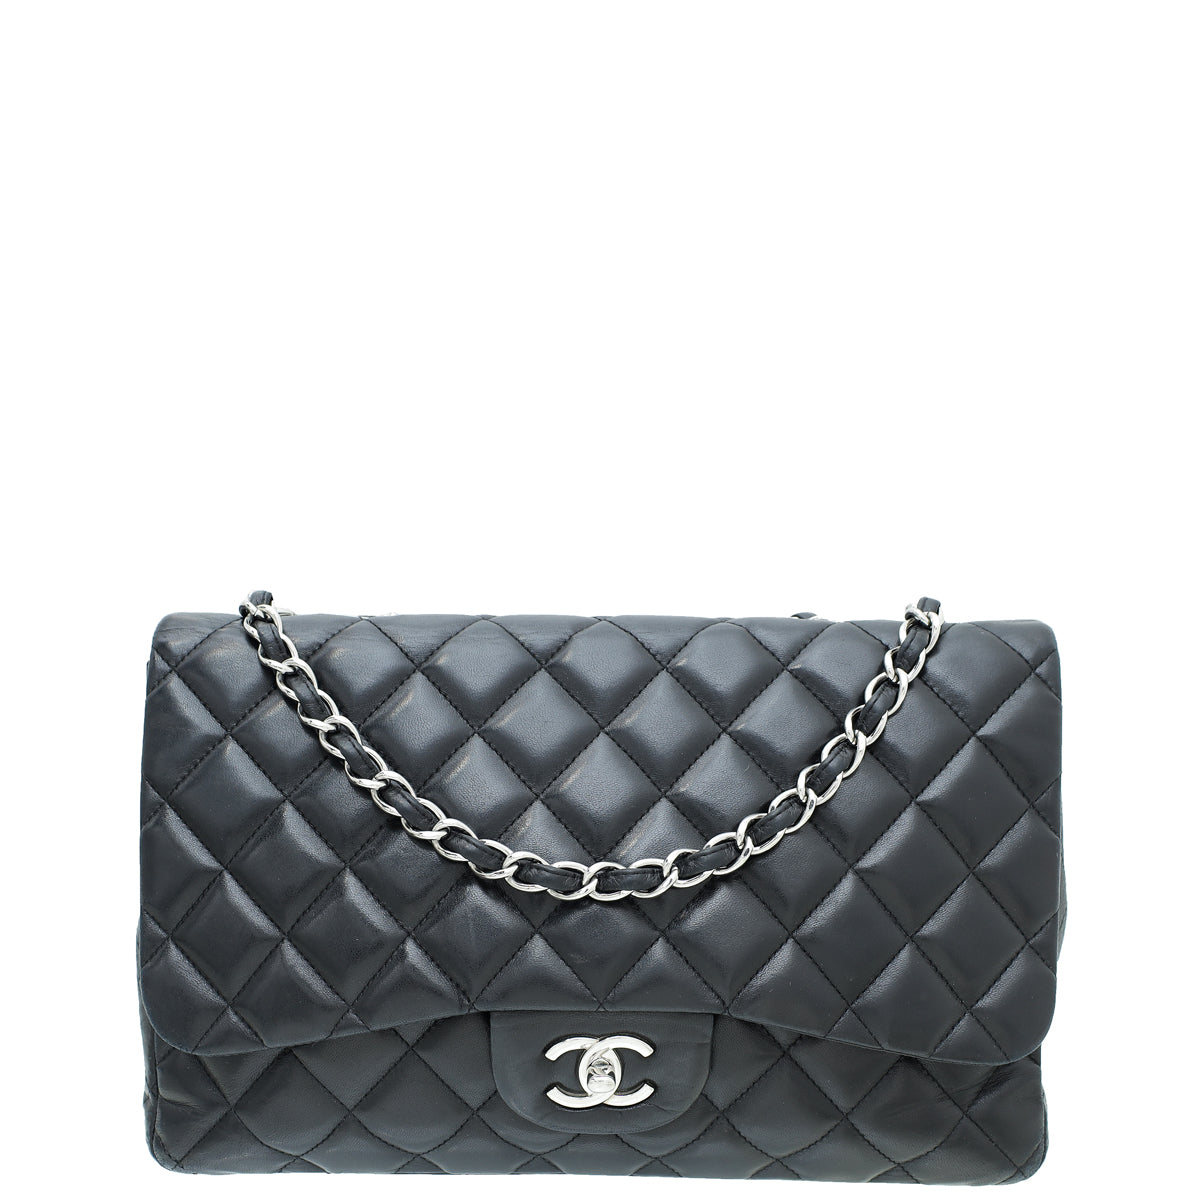 Chanel Black Quilted Lambskin Vintage Box Bag Chanel | The Luxury Closet